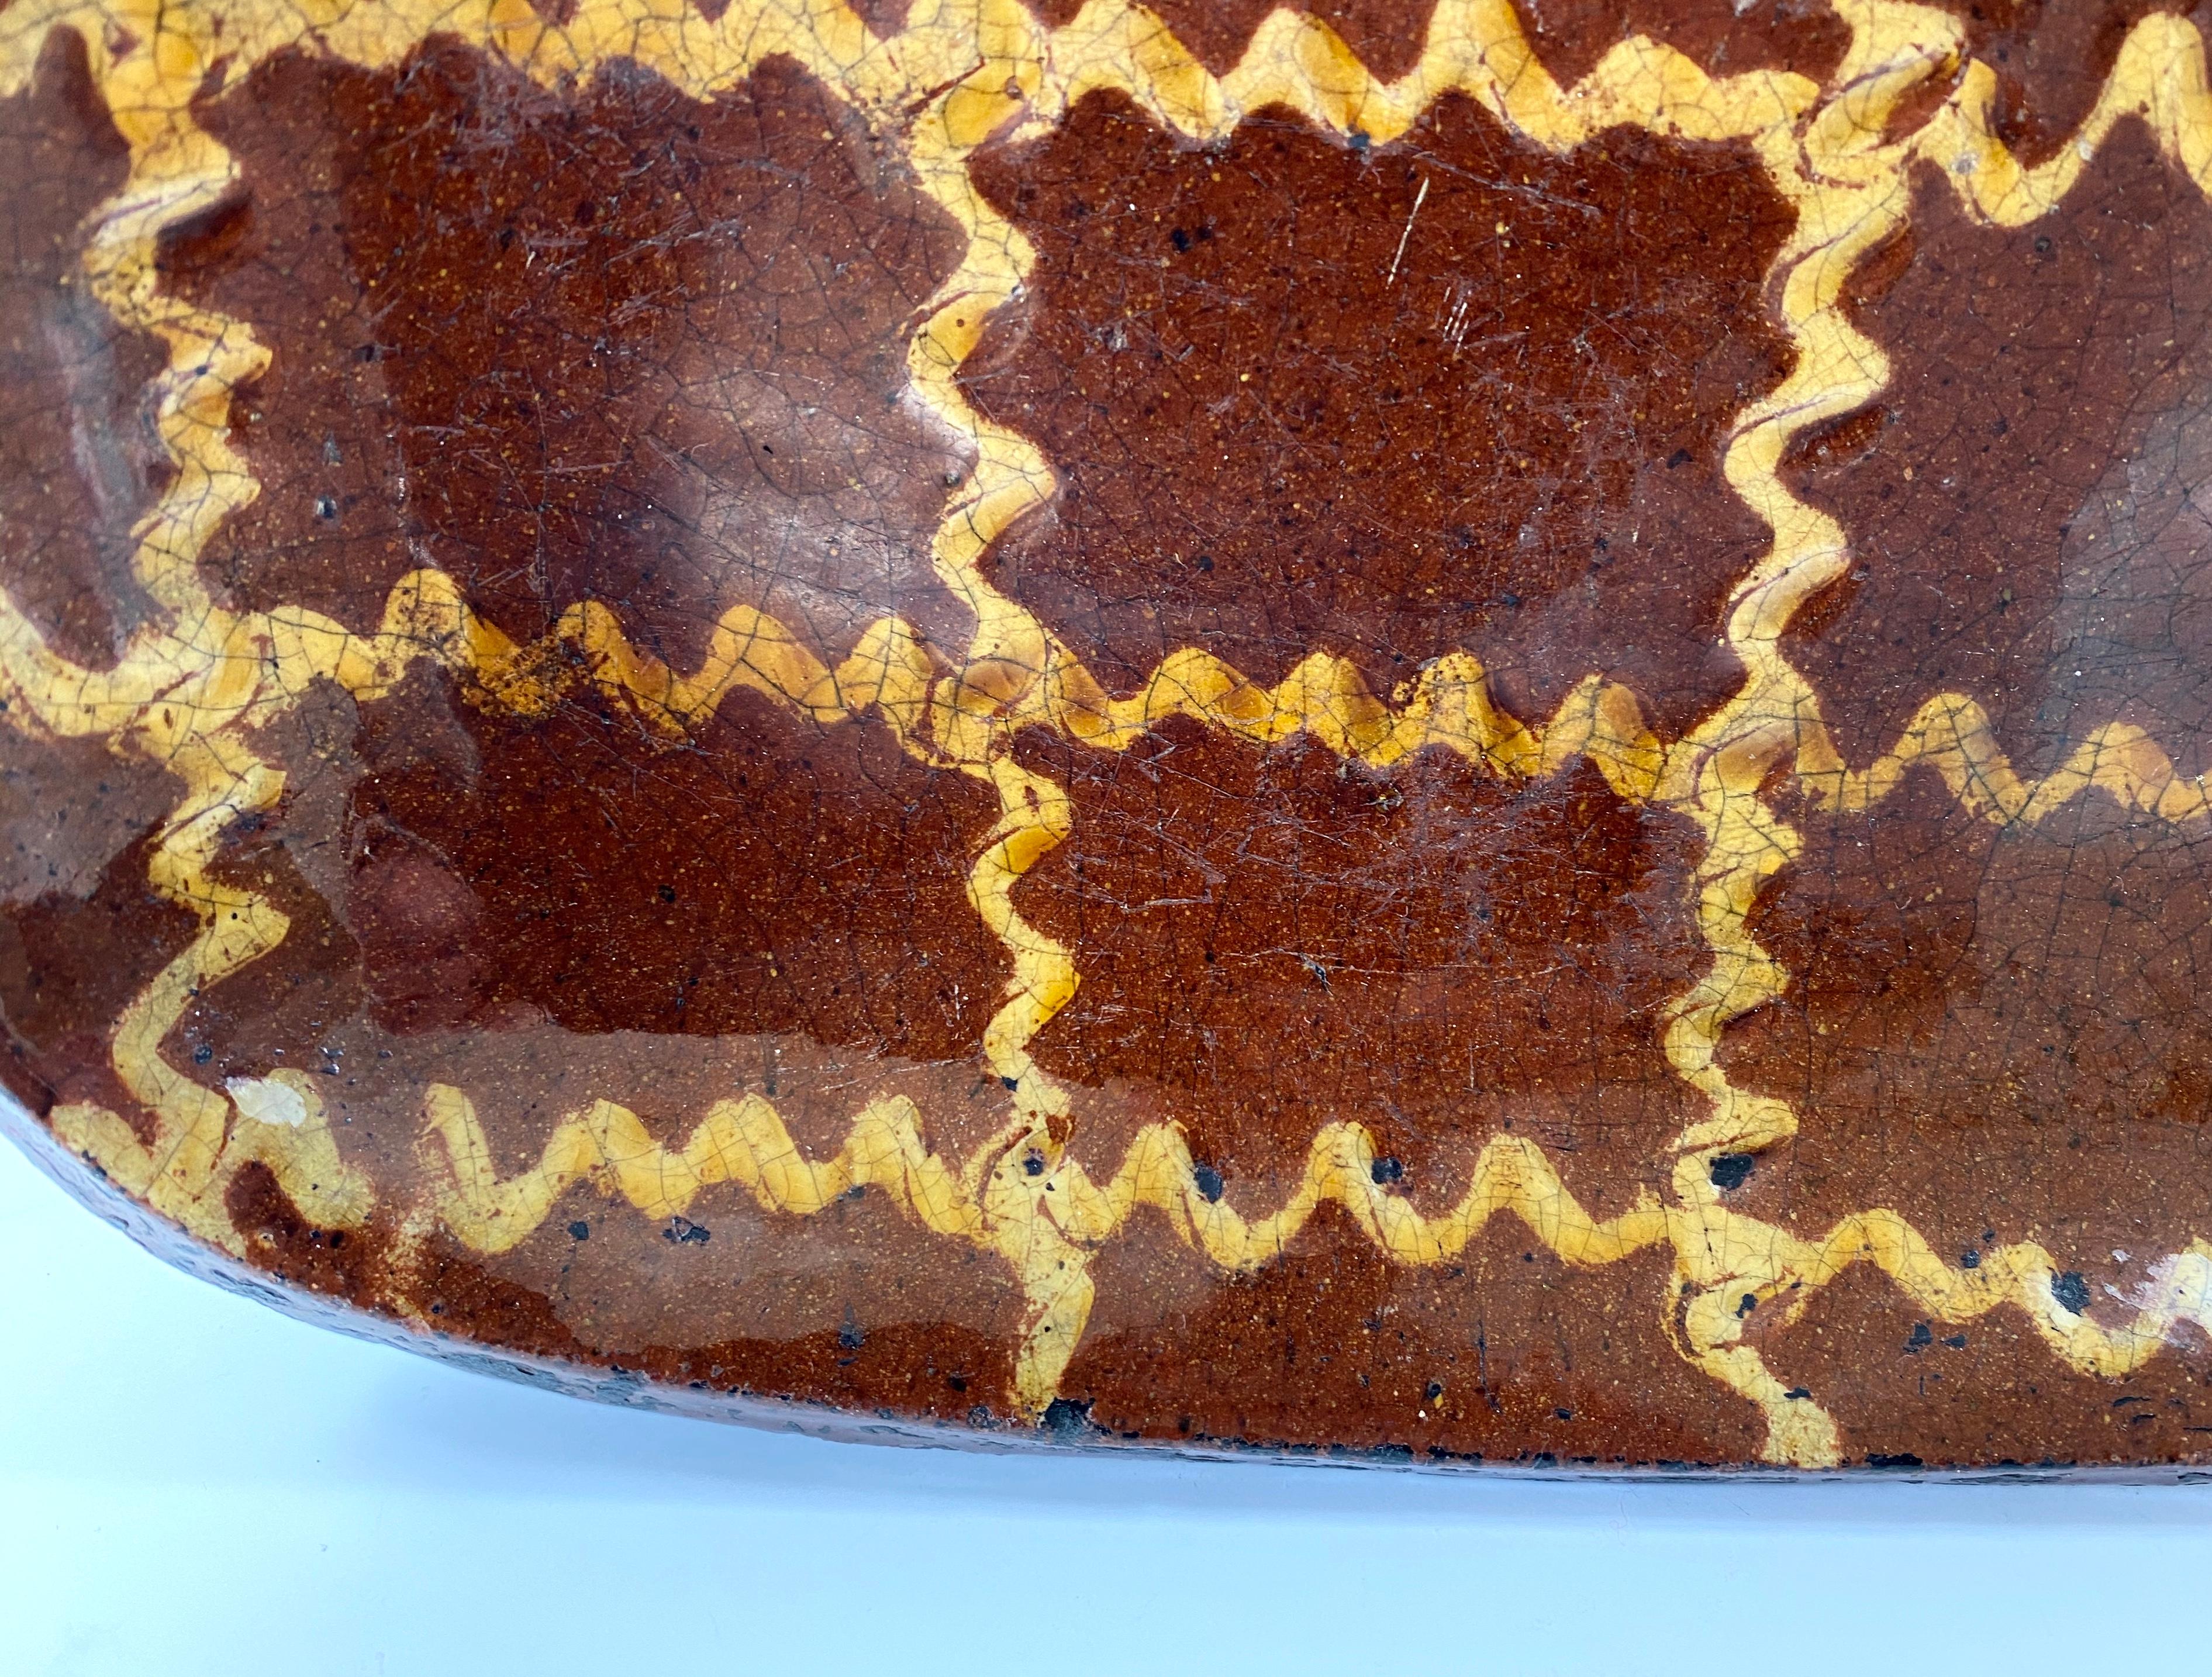 English pottery slipware baking dish, late 18th century. The plain edged, brown glazed dish, trailed in creamy yellow slip, with a wriggled, trellis design, beneath a thick, crazed glaze.
The underside baked black.
Staffordshire or Northern